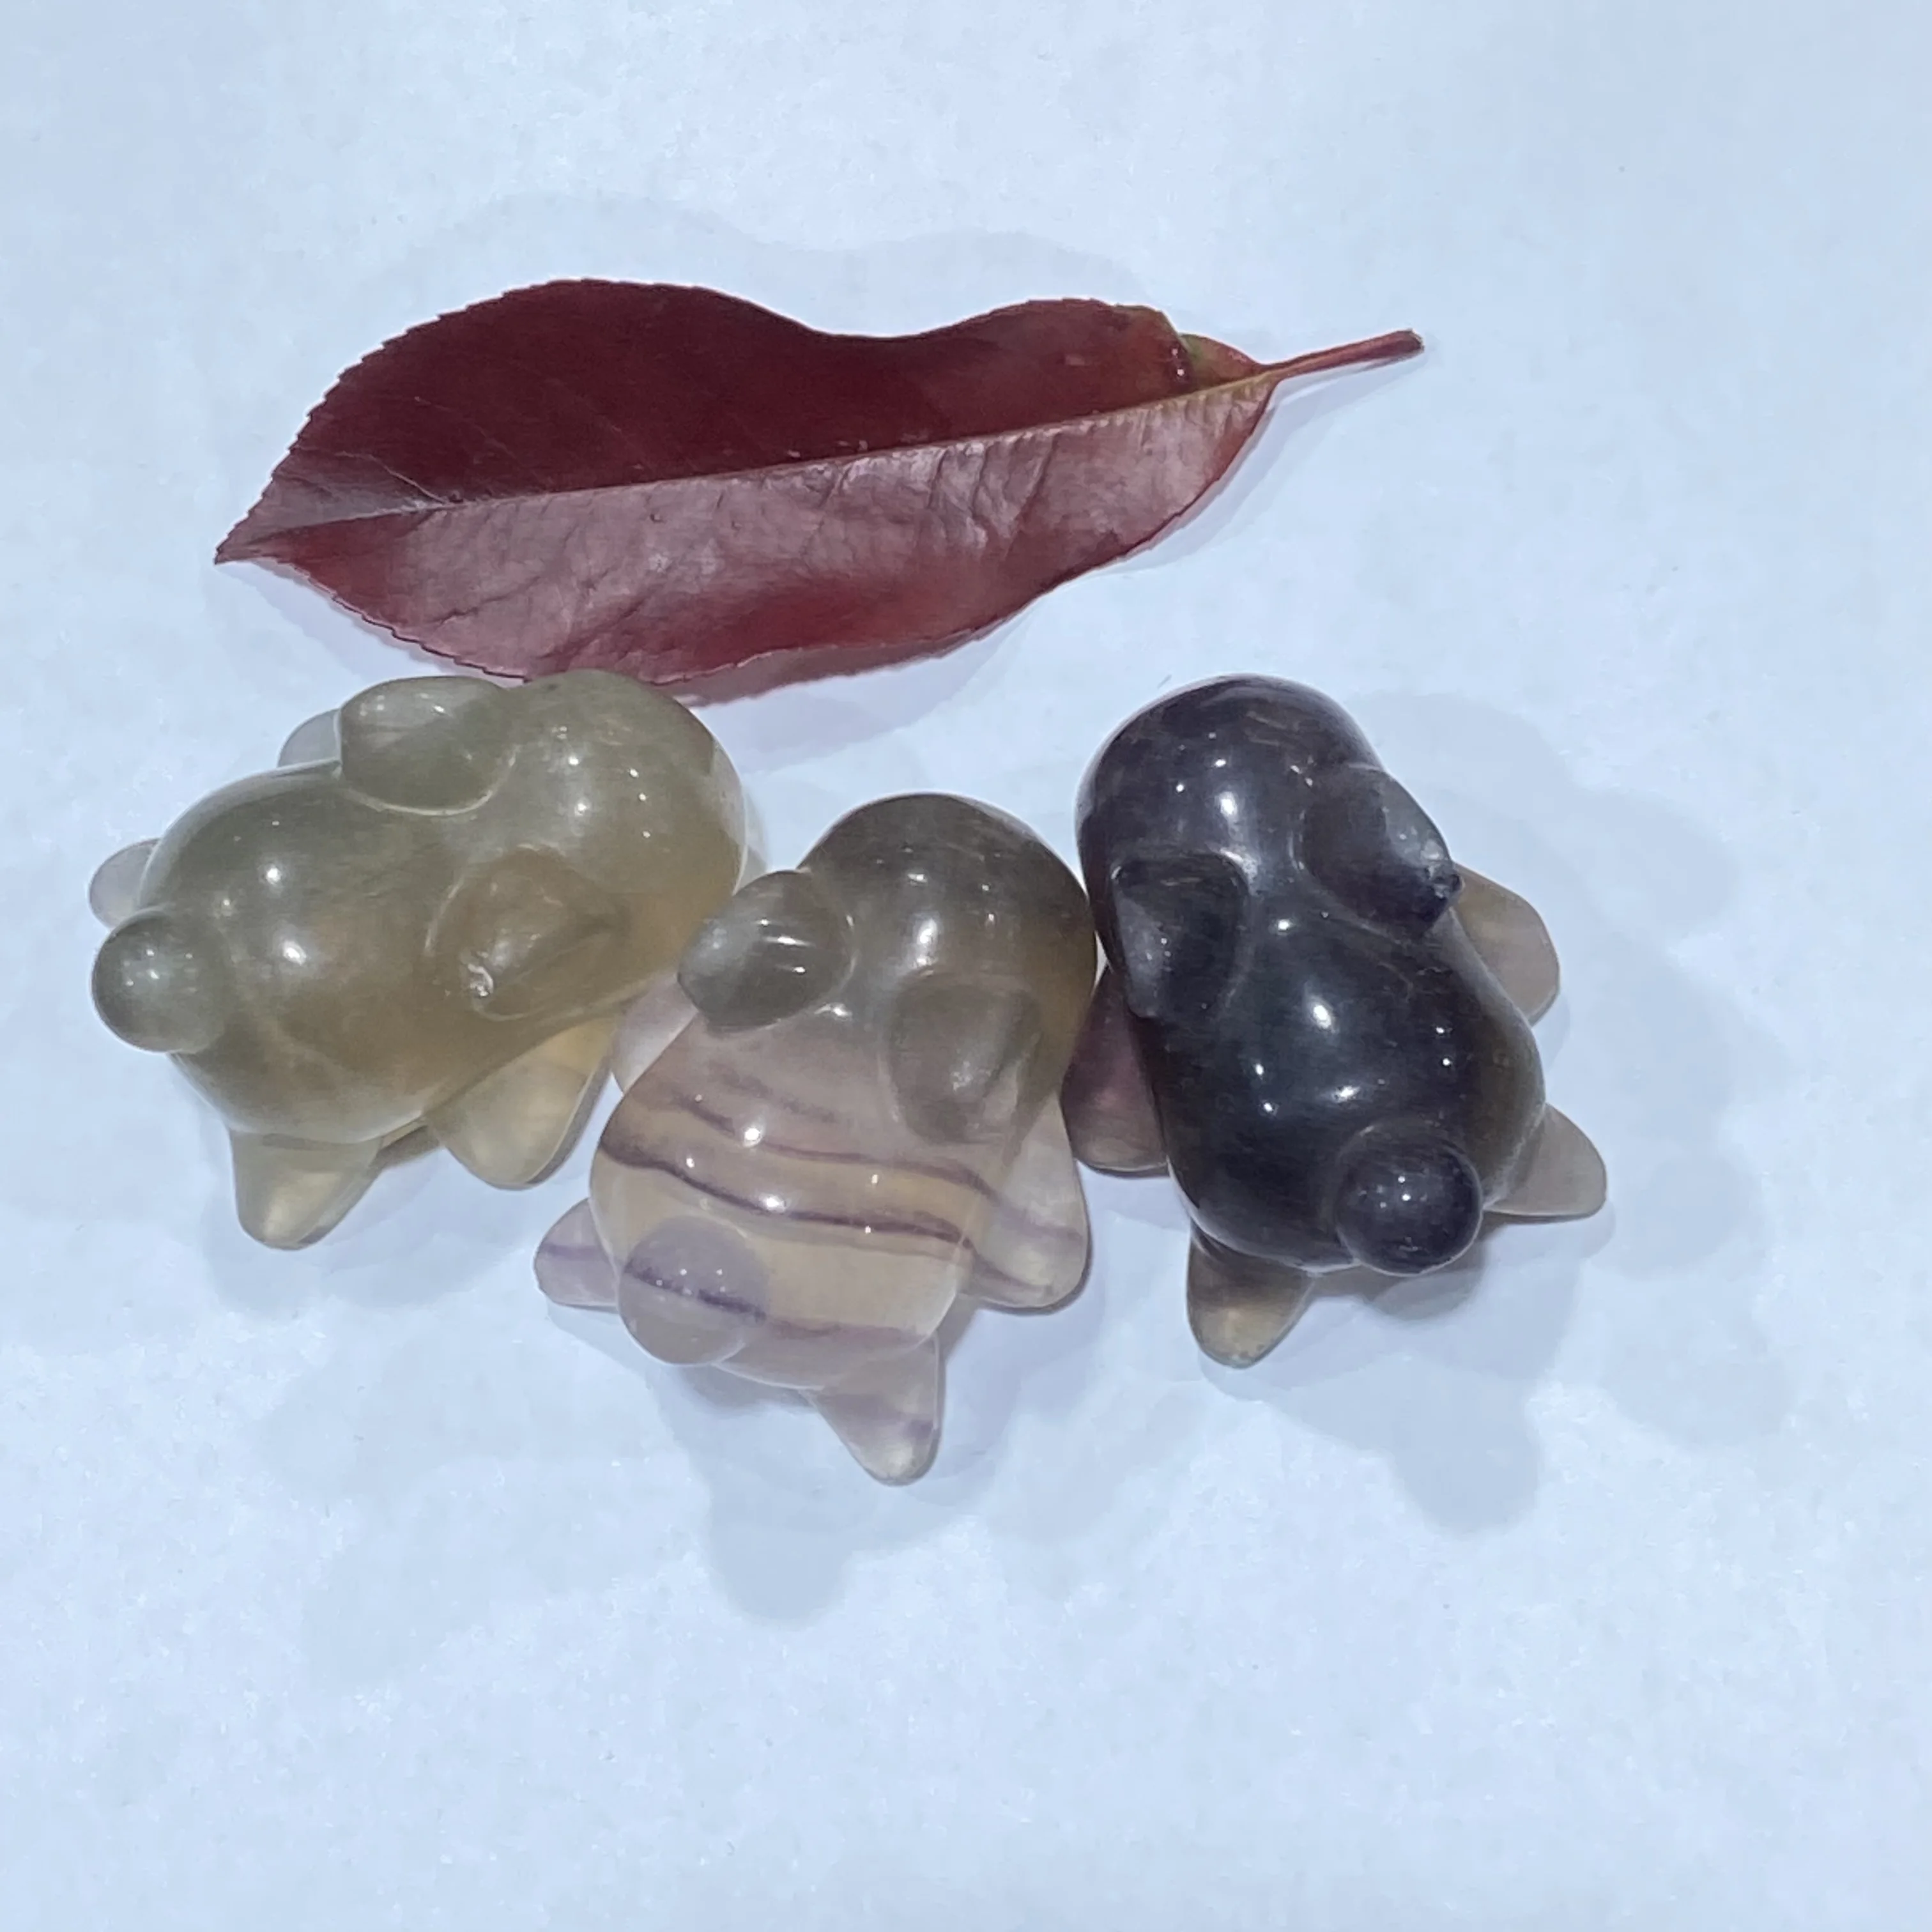 Wholesale Crystal Mini Hand Carved Animal Crafts Natural Crystal Polishing Fluorite Rabbit For Home Decoration (1600463984361)